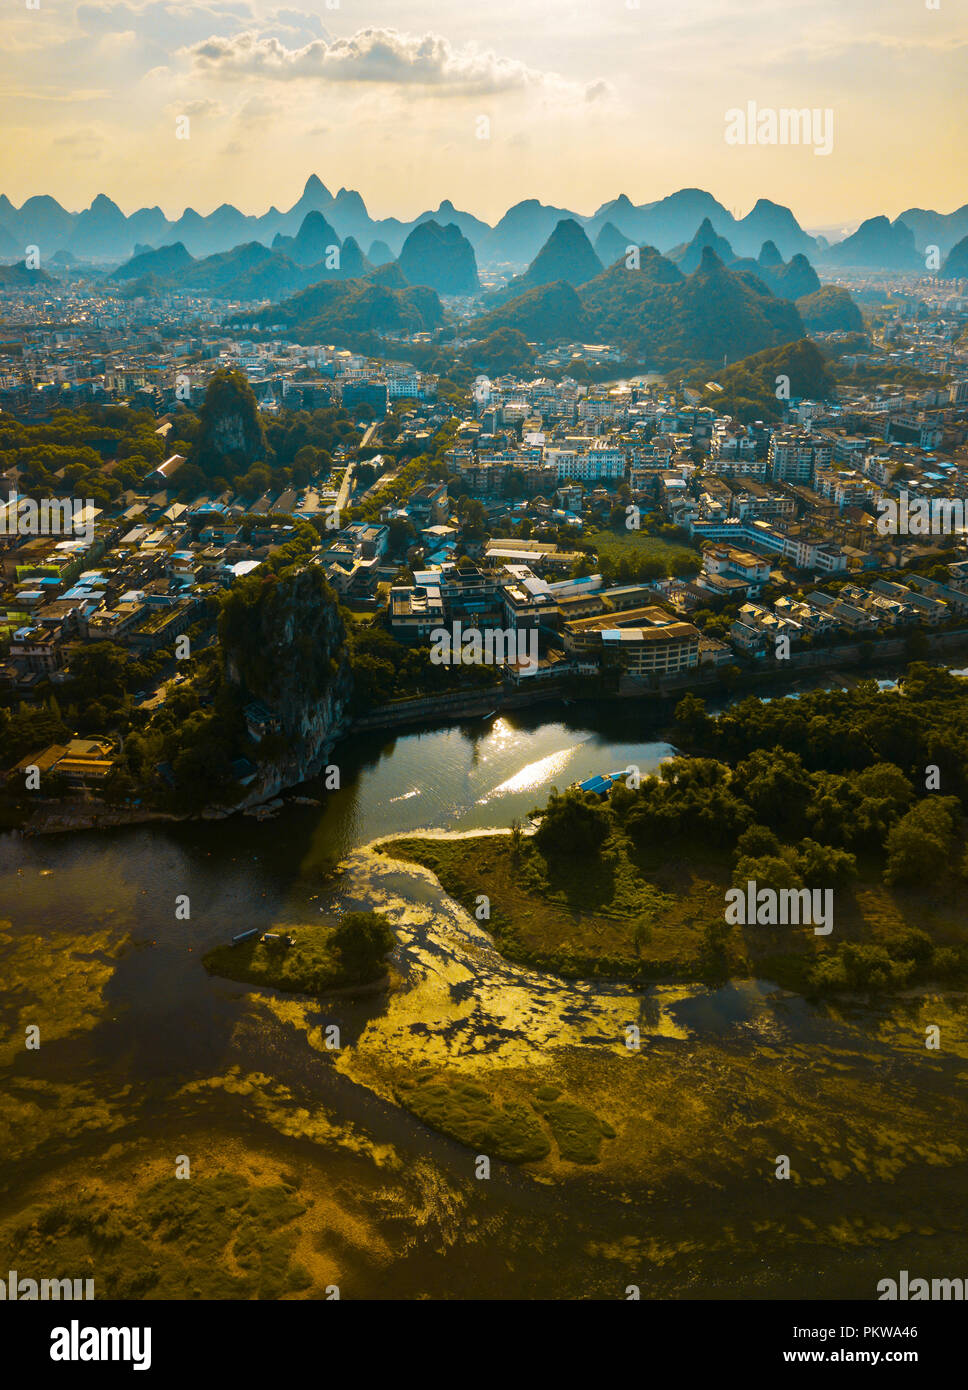 Li river and stunning karst rock mountains in Guilin China Stock Photo